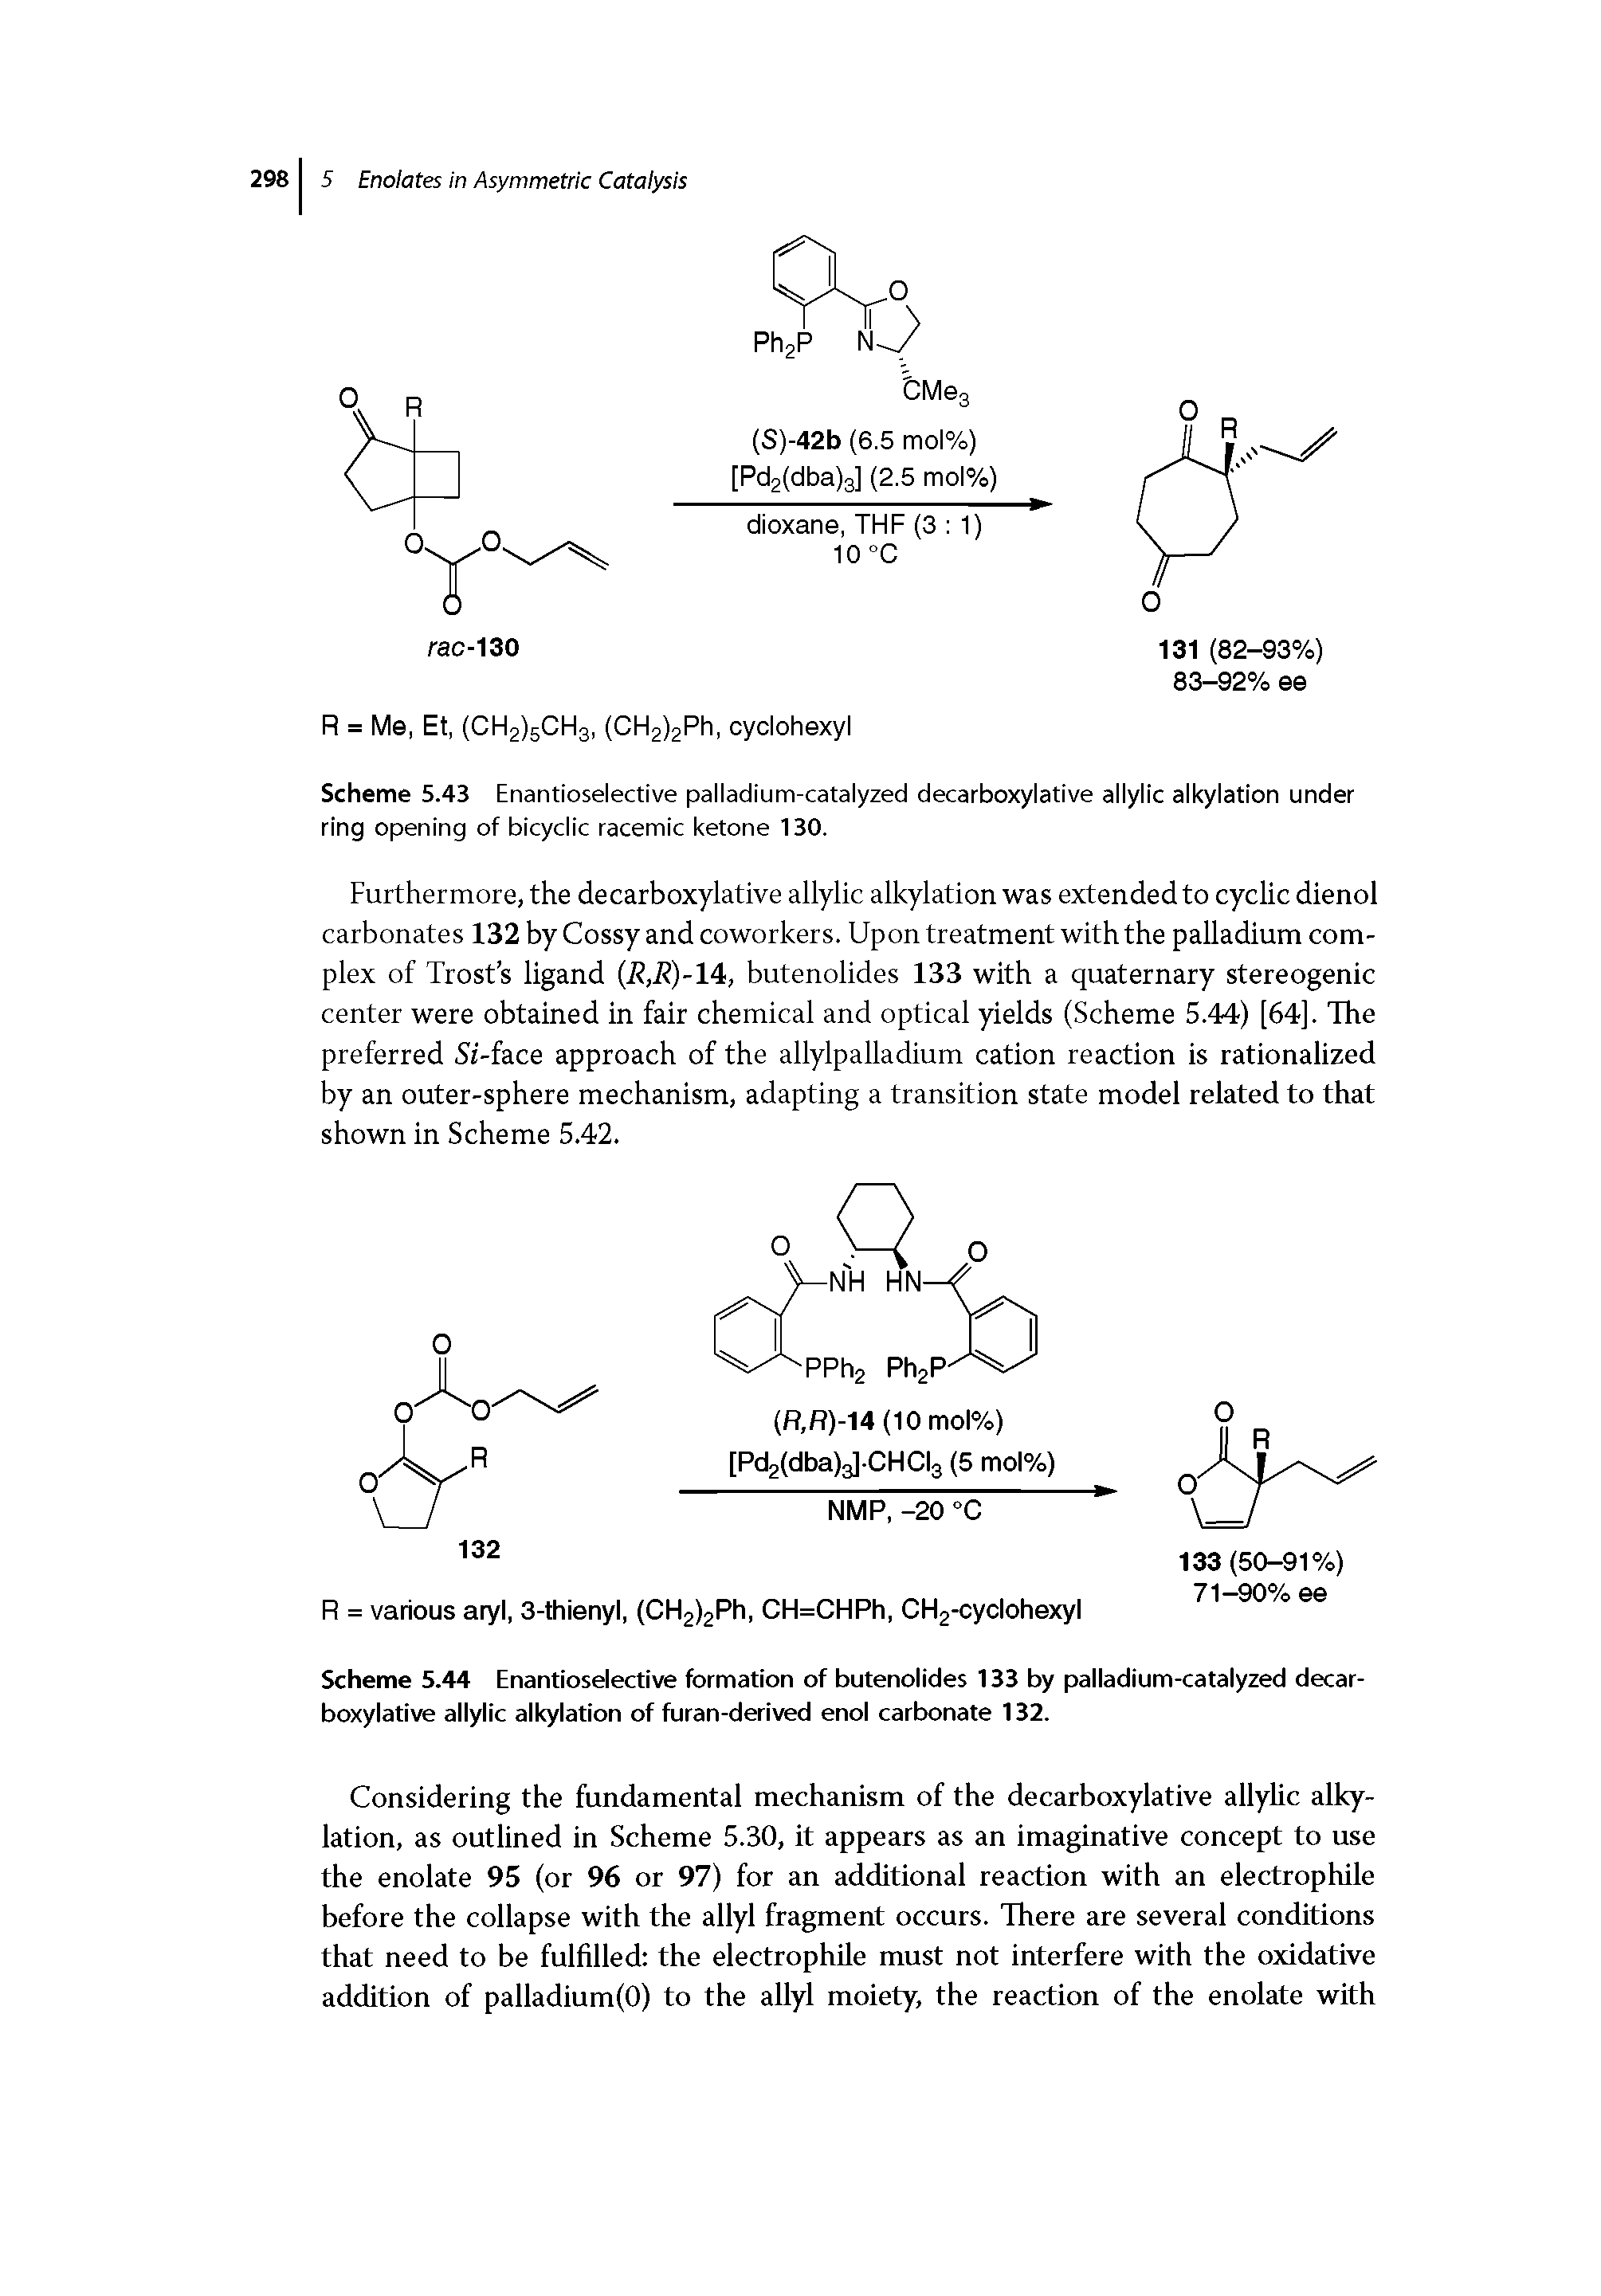 Scheme 5.44 Enantioselective formation of butenolides 133 by palladium-catalyzed decarboxylative allylic alkylation of furan-derived enol carbonate 132.